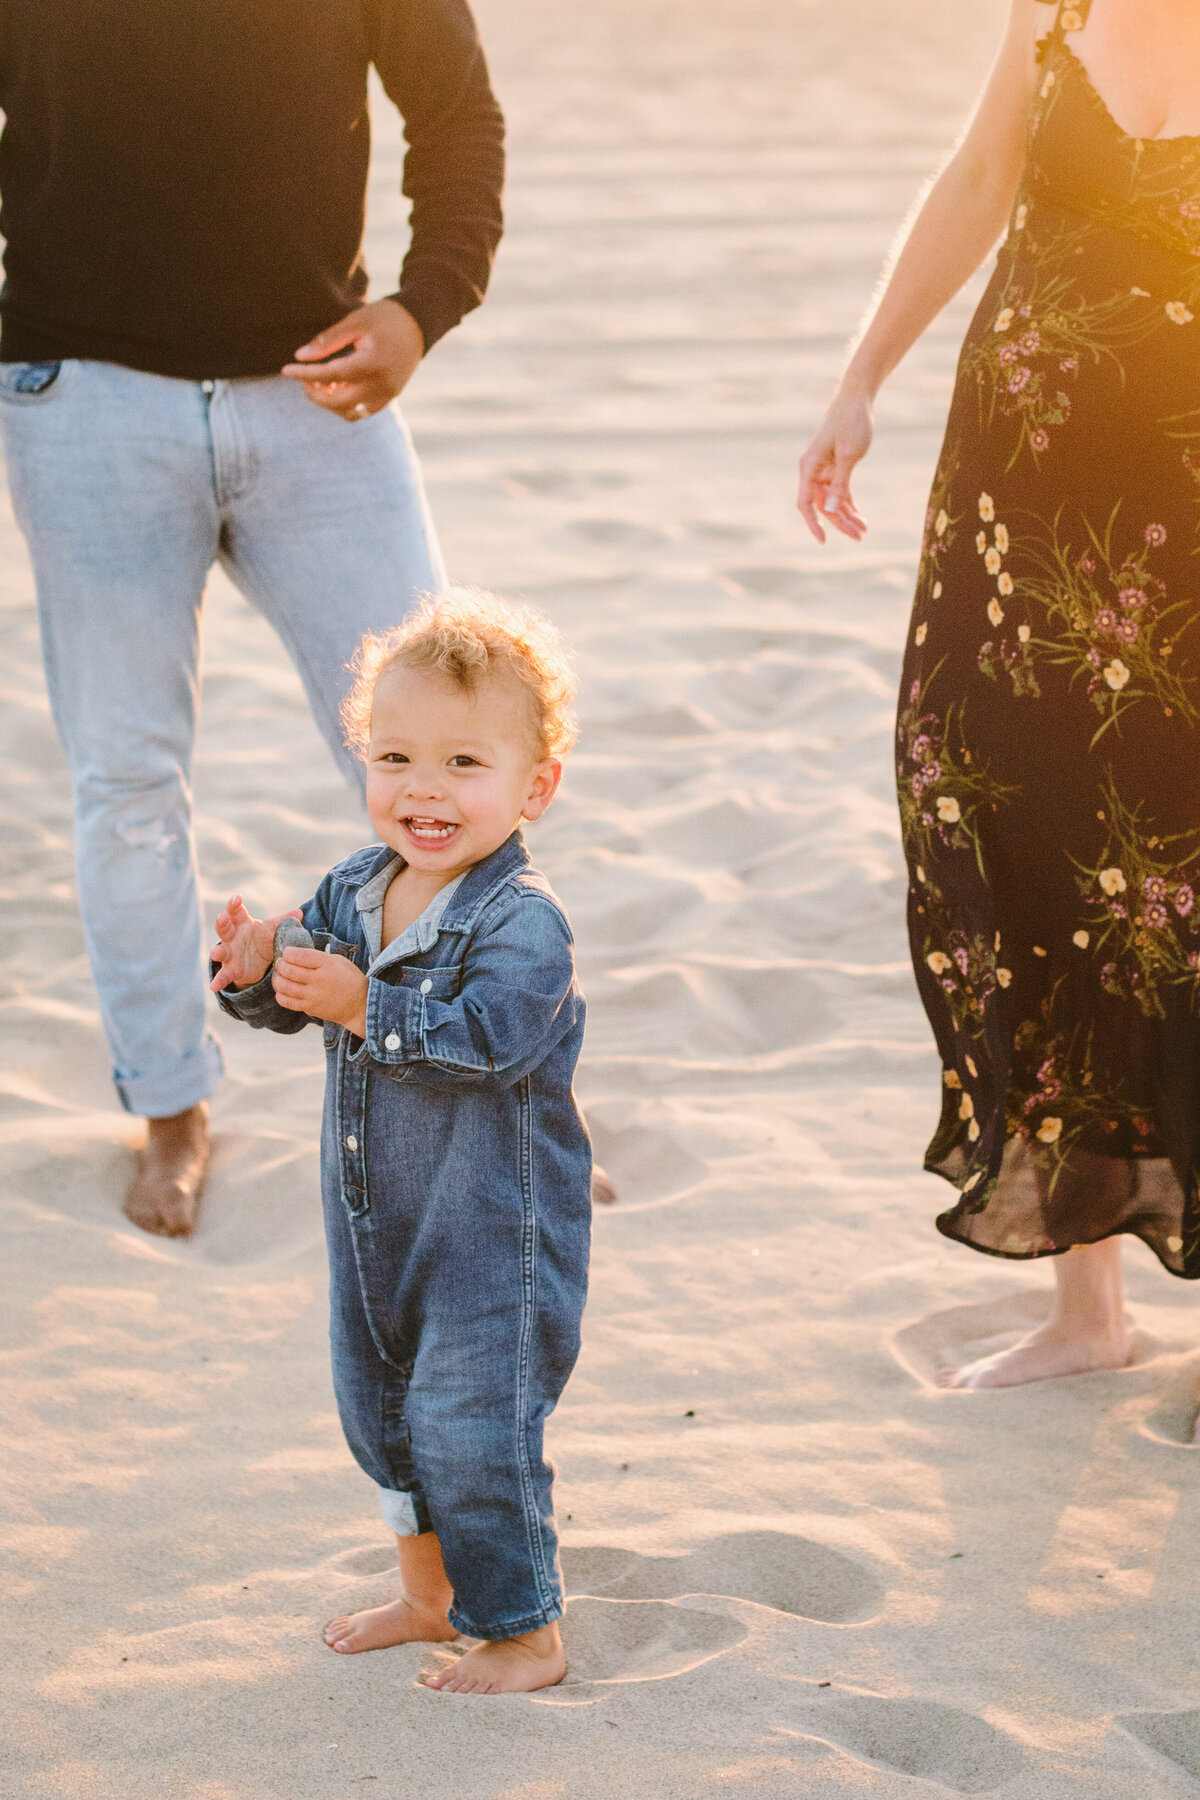 Best California and Texas Family Photographer-Jodee Debes Photography-292